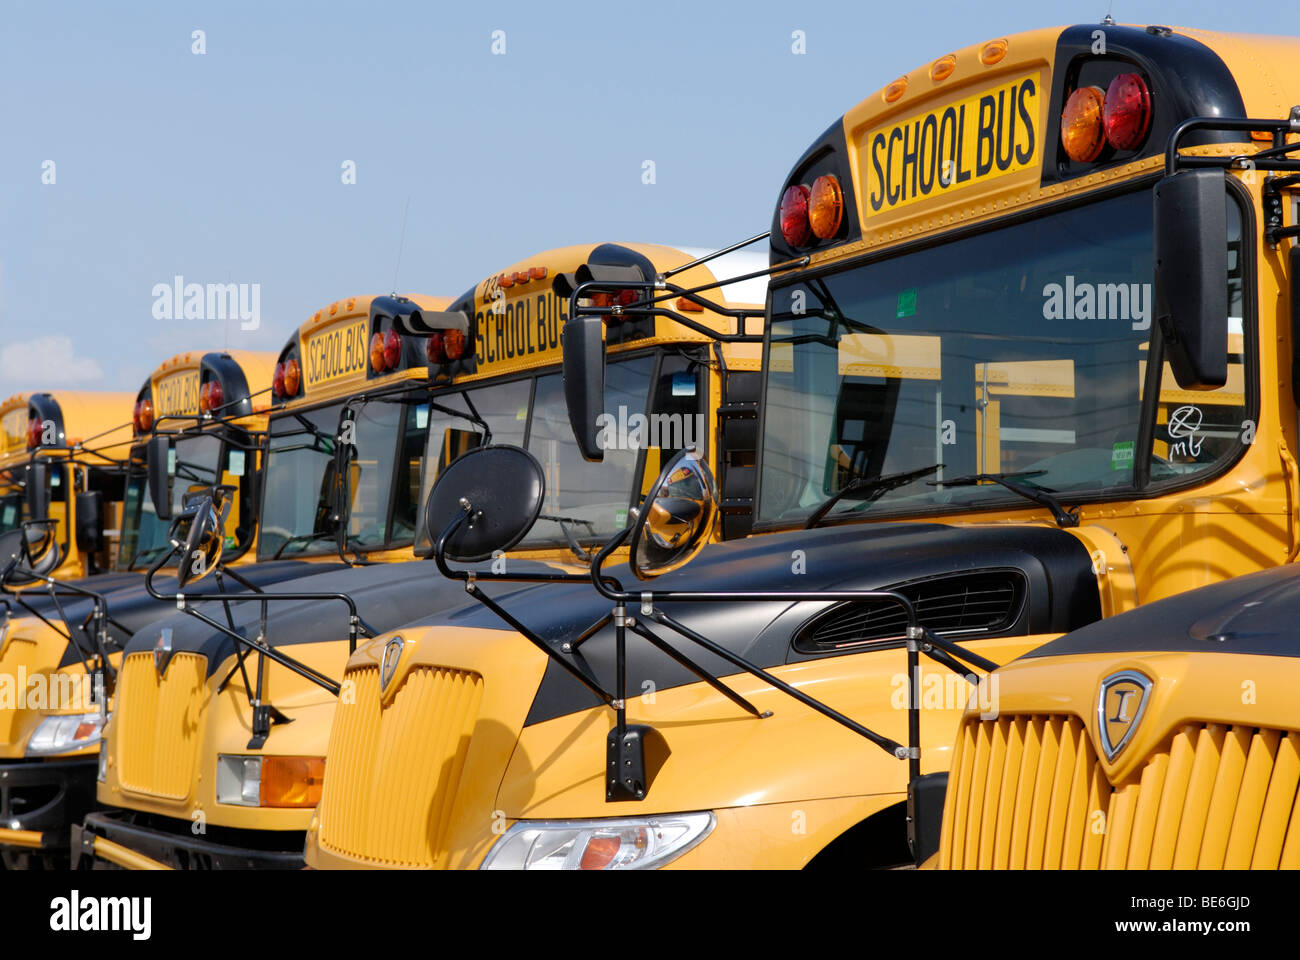 School buses parked Stock Photo